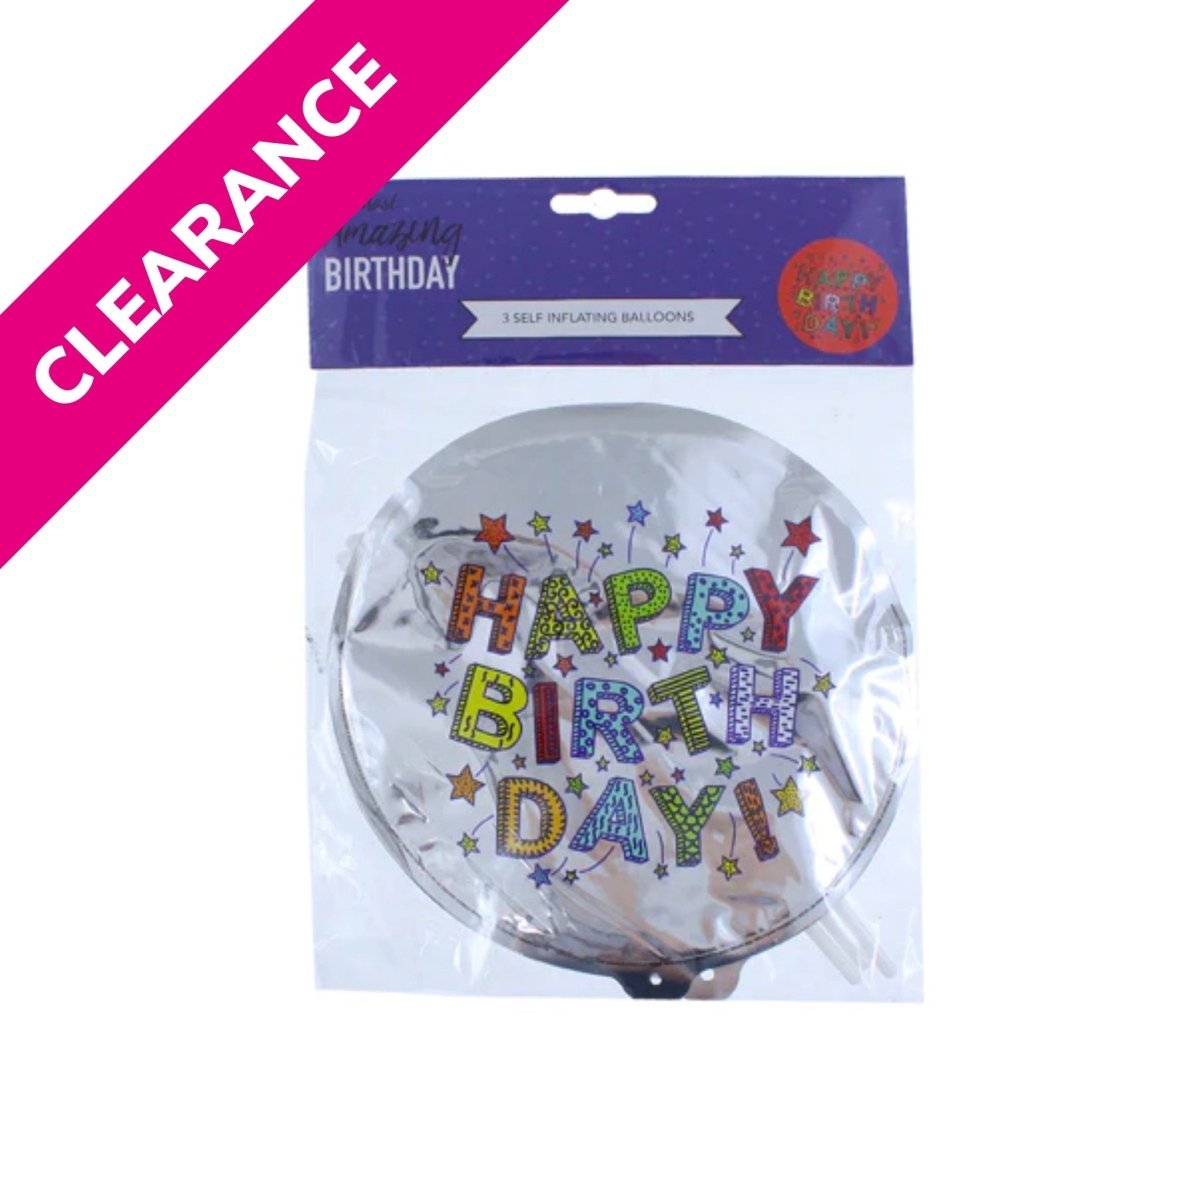 Happy Birthday Self Inflating Balloons 3pk - Kids Party Craft